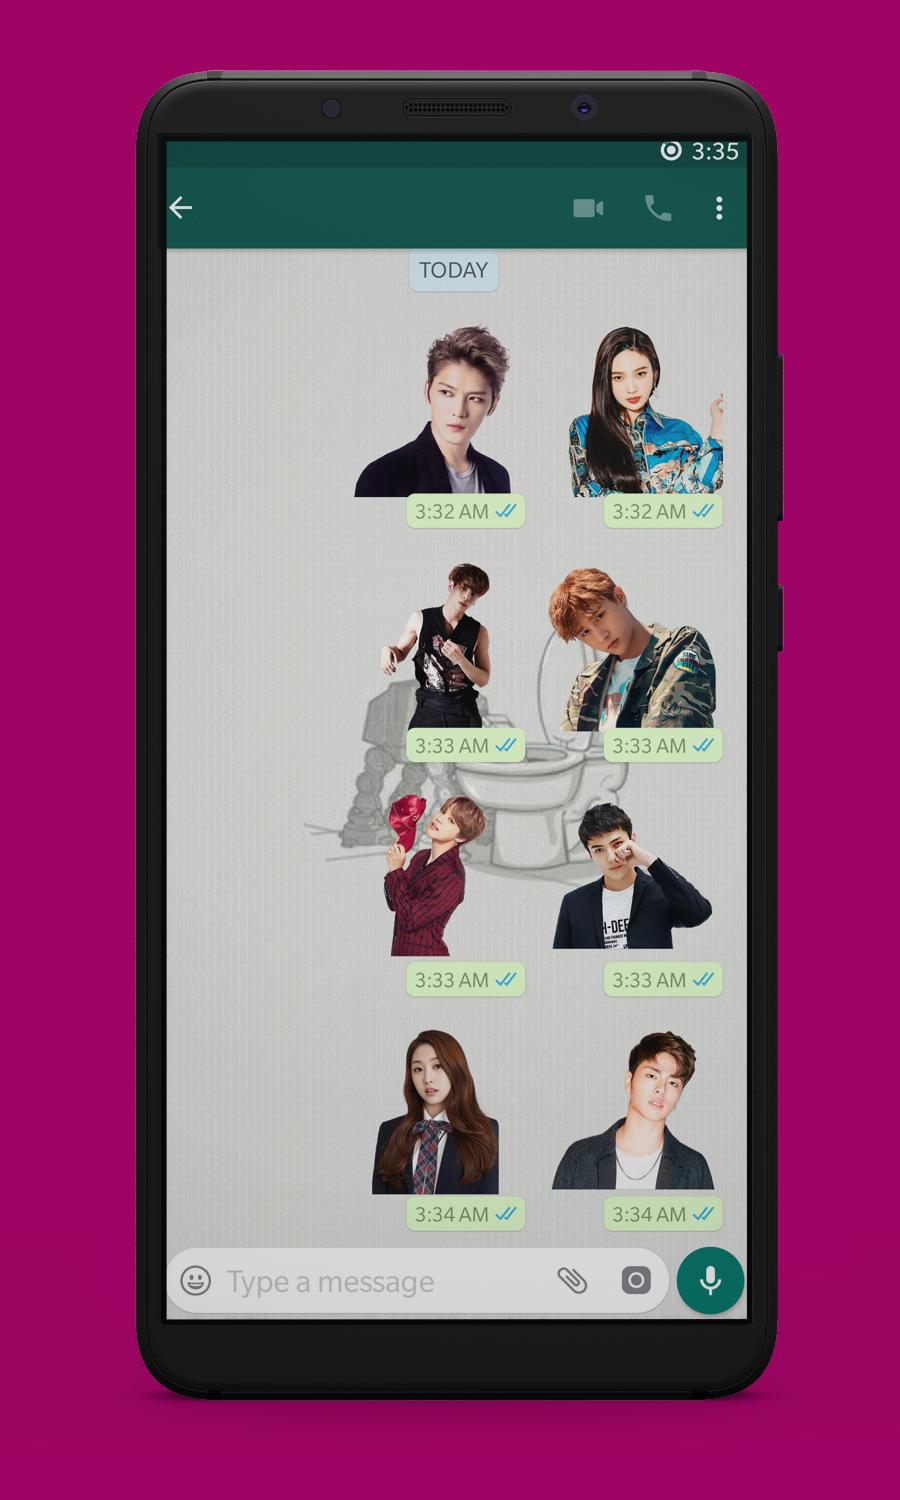 Stikrz Kpop Sticker Packs For Whatsapp For Android Apk Download